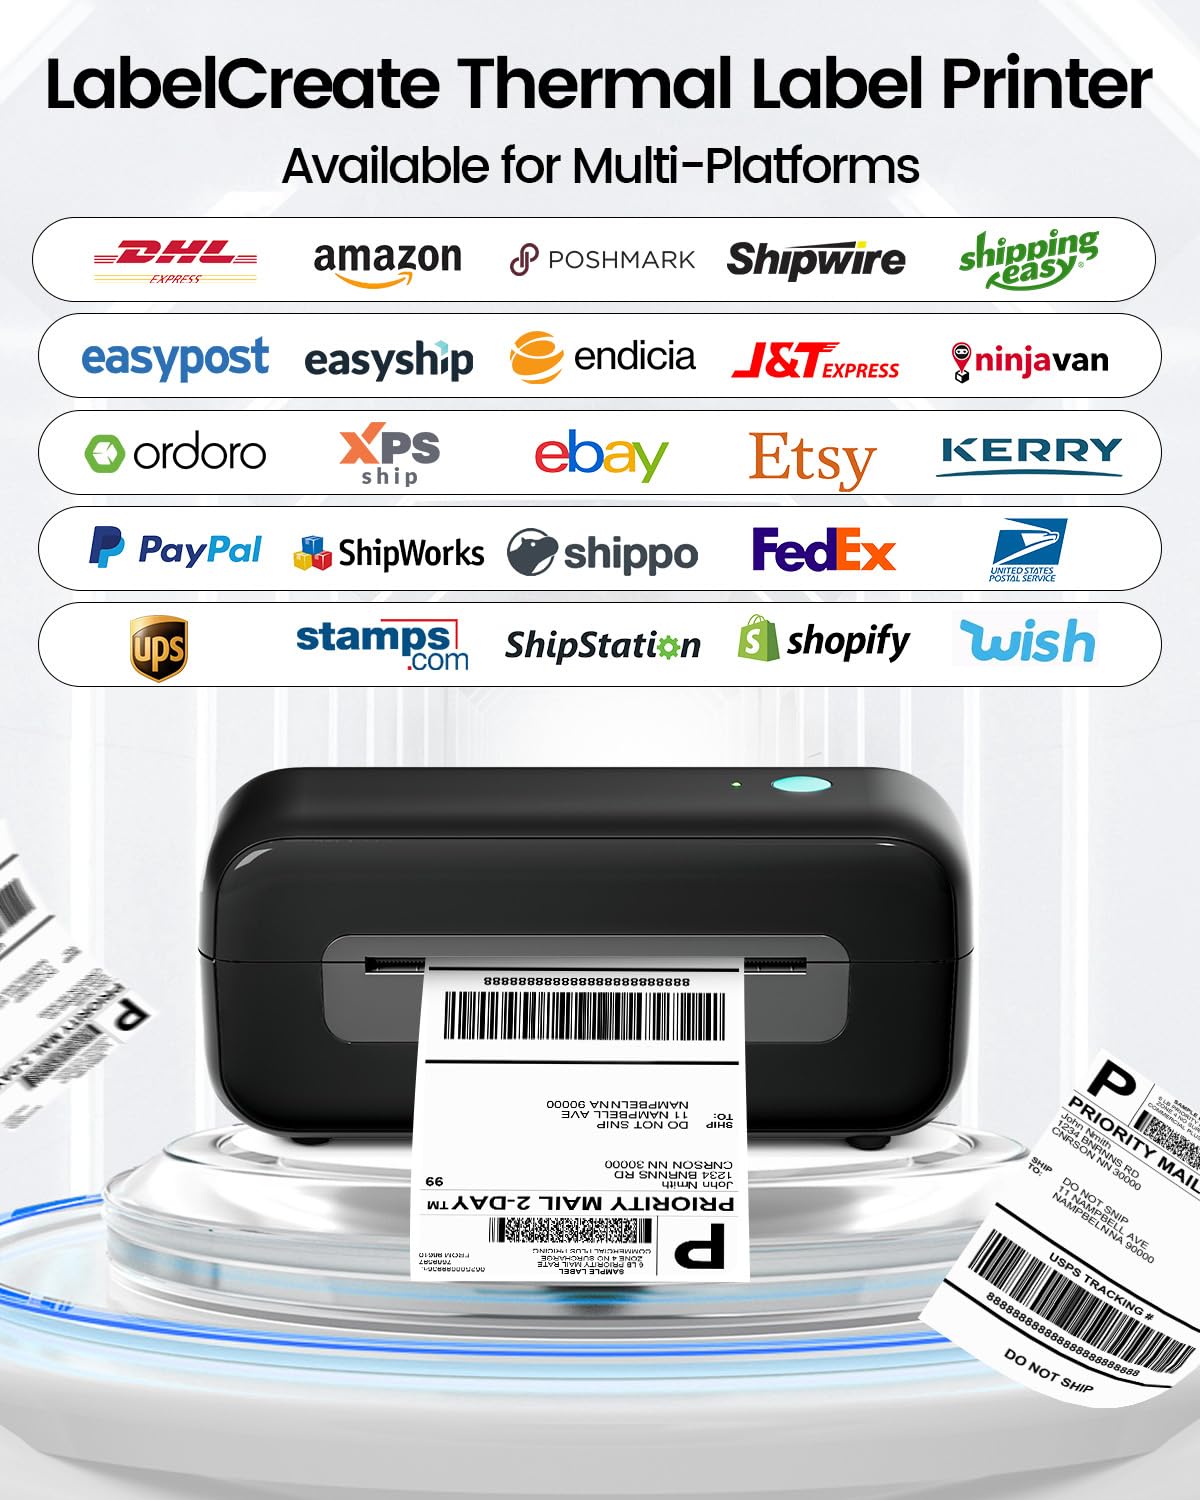 LabelCreate Shipping Label Printer, 4x6 Thermal Label Printer, Thermal Printer for Shipping Labels, USB Label Printer Compatible with Amazon Shopify Etsy Ebay FedEx USPS UPS (Black)